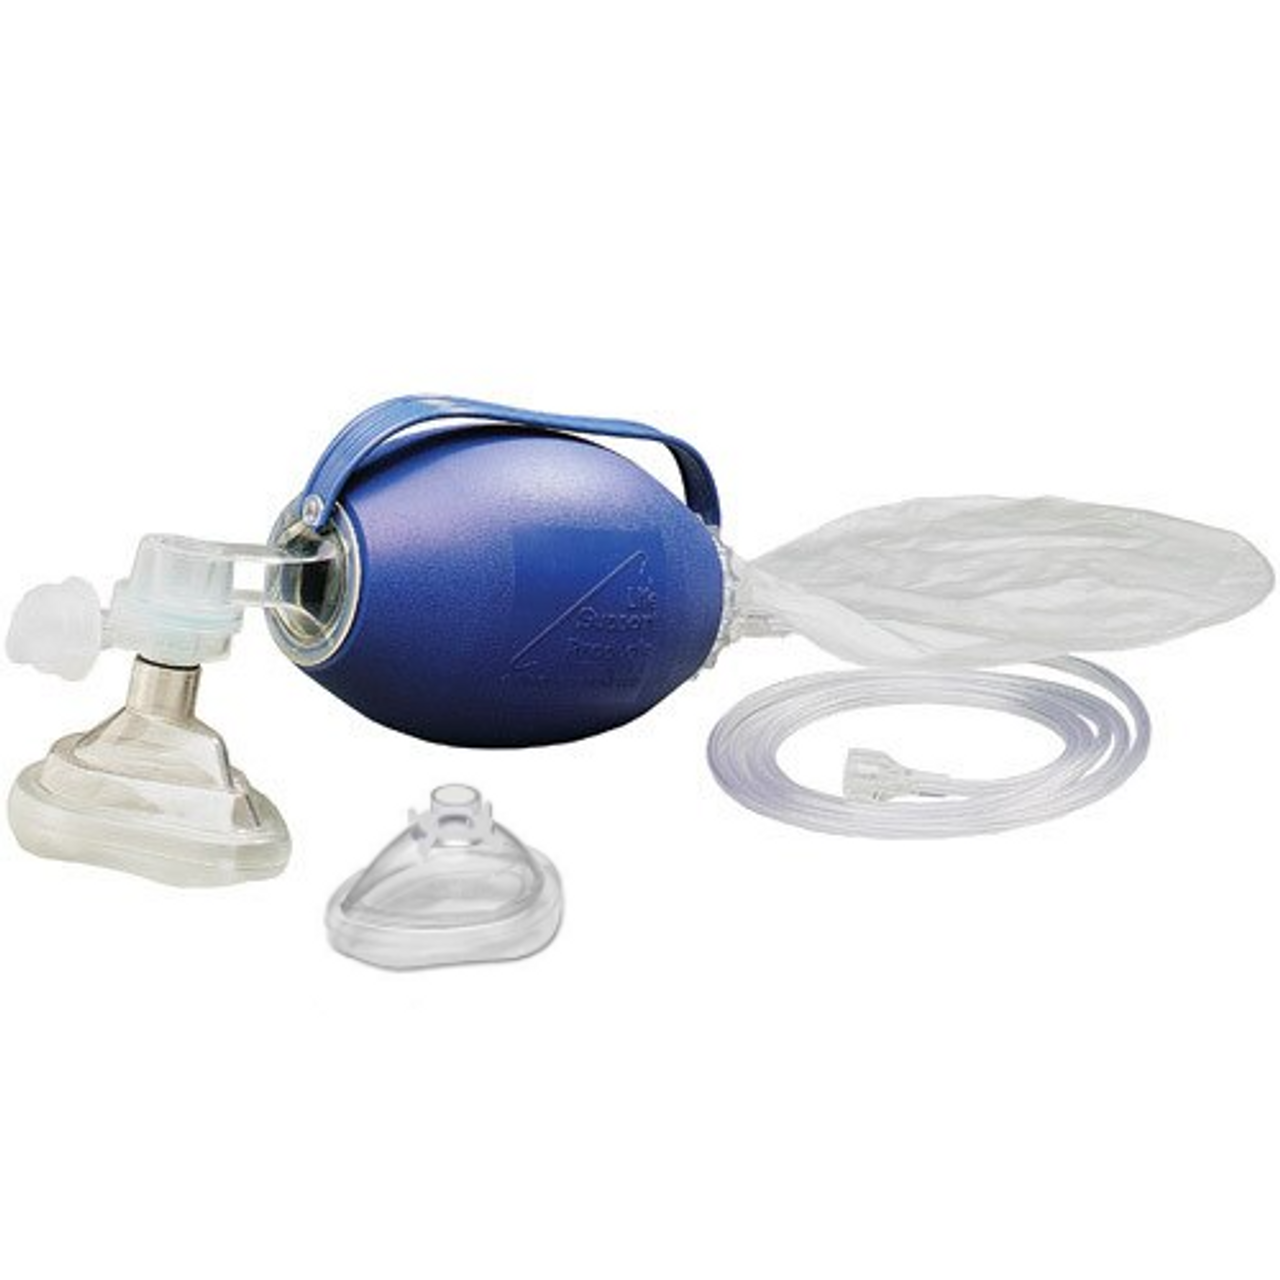 Adult BVM by Allied Medical with Added Medium Mask